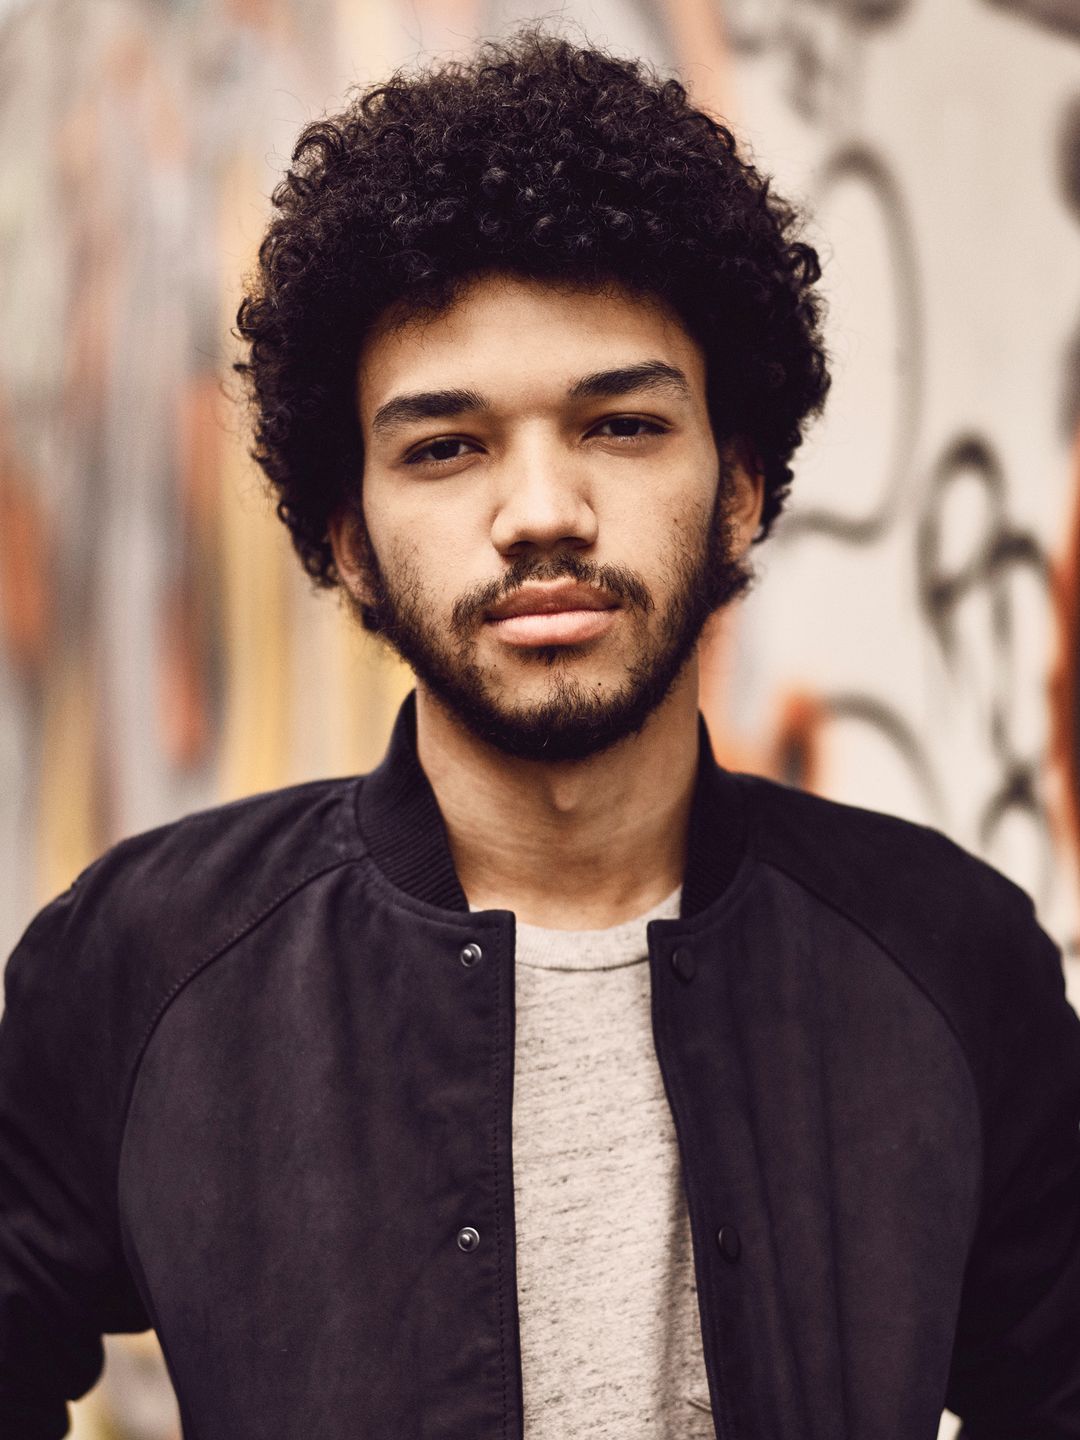 Justice Smith early life